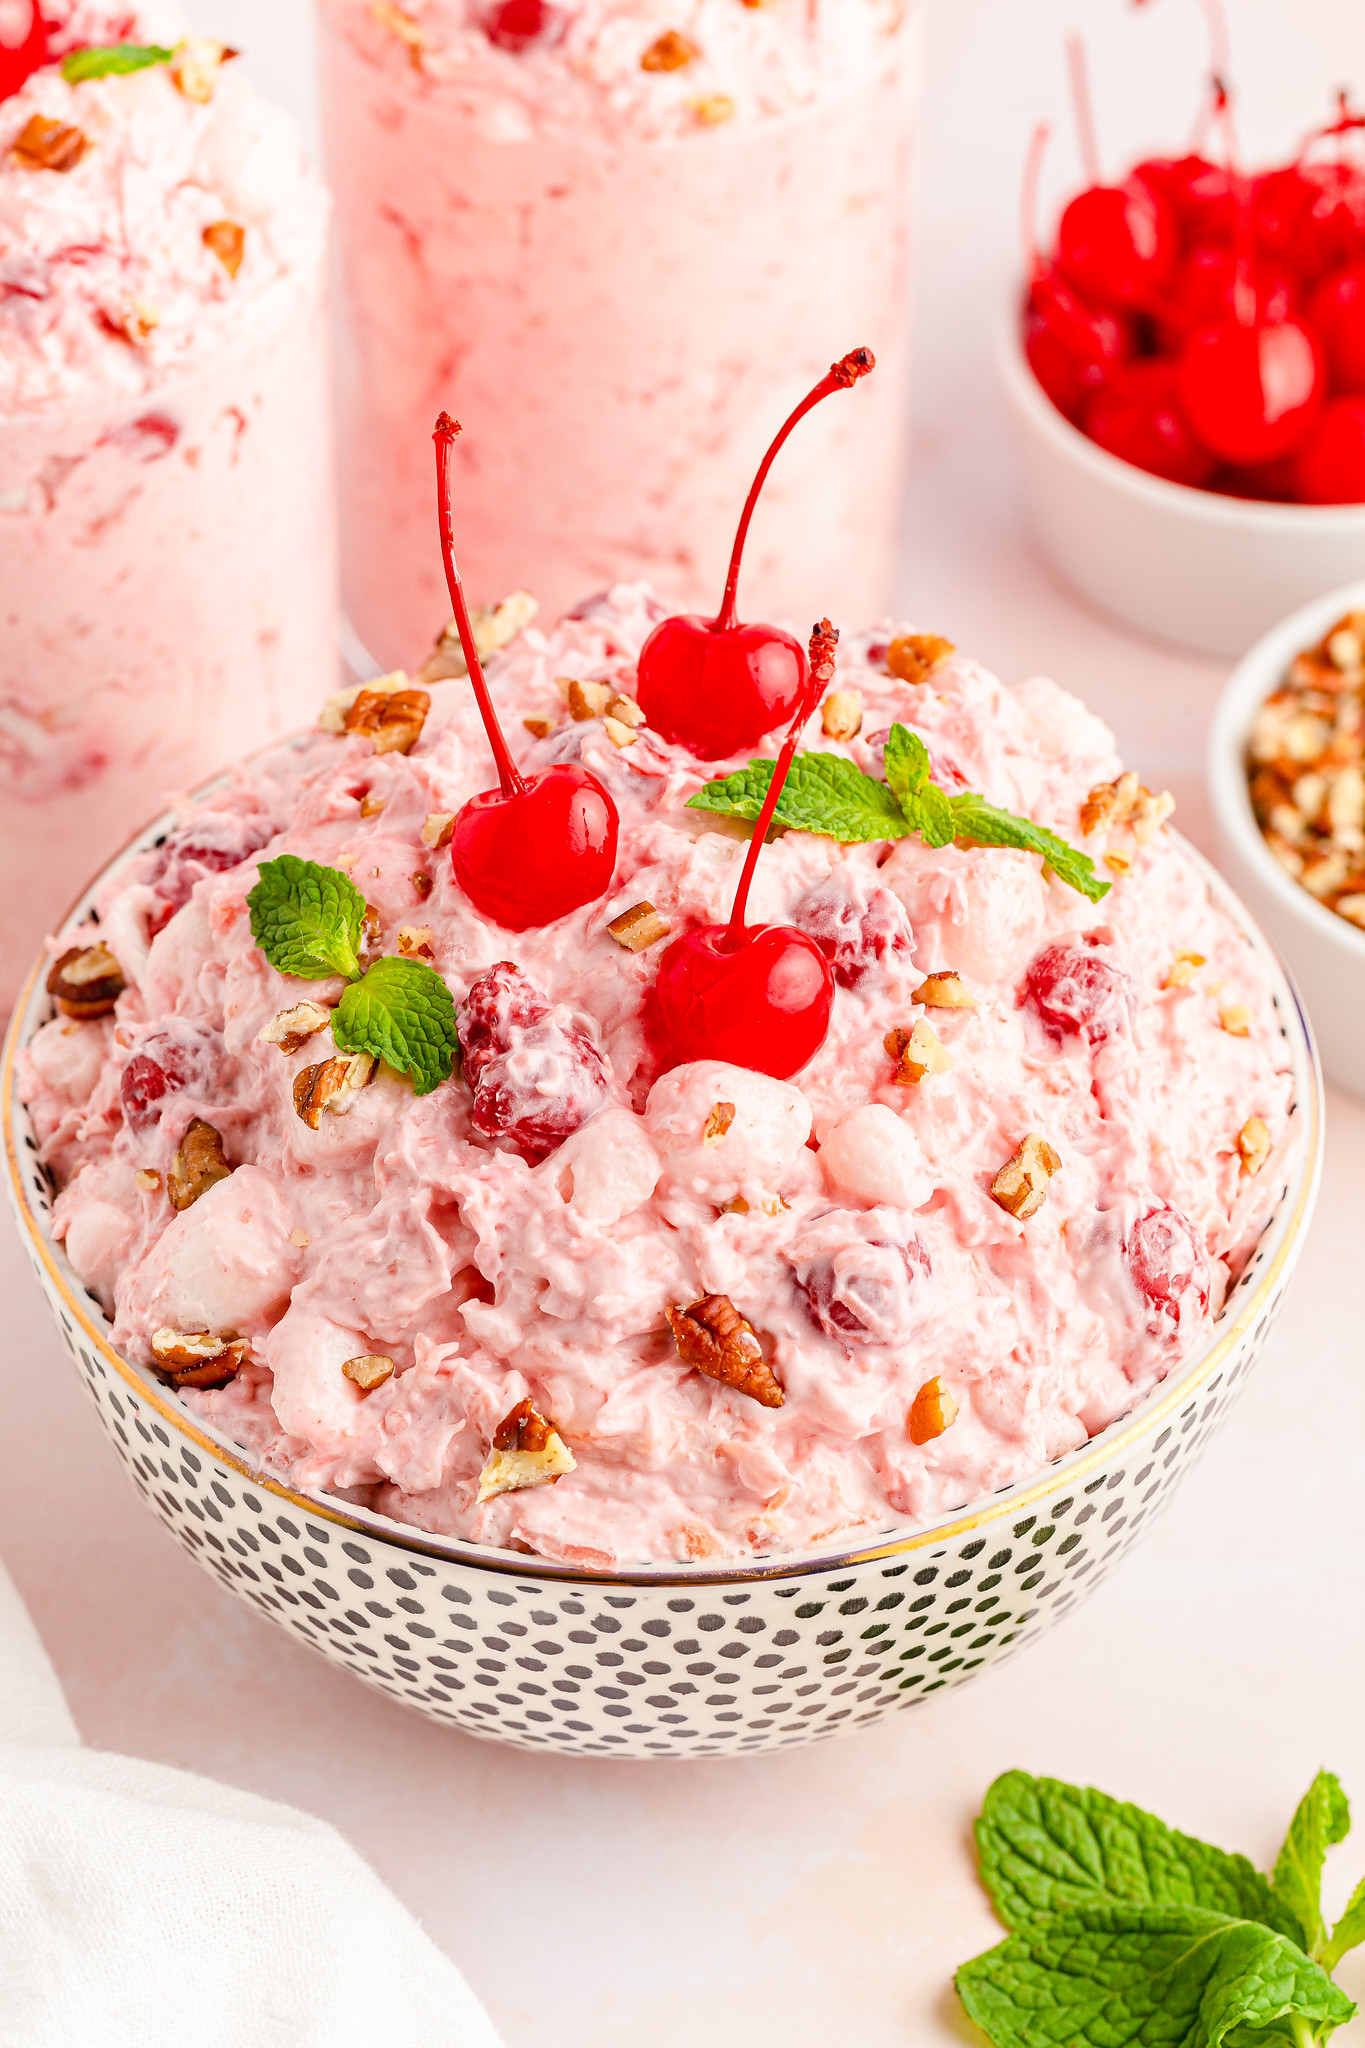 Cherry Fluff is a fluffy fruit salad made with cherry pie filling, marshmallows, coconut, and nuts. The perfect no bake summer dessert!